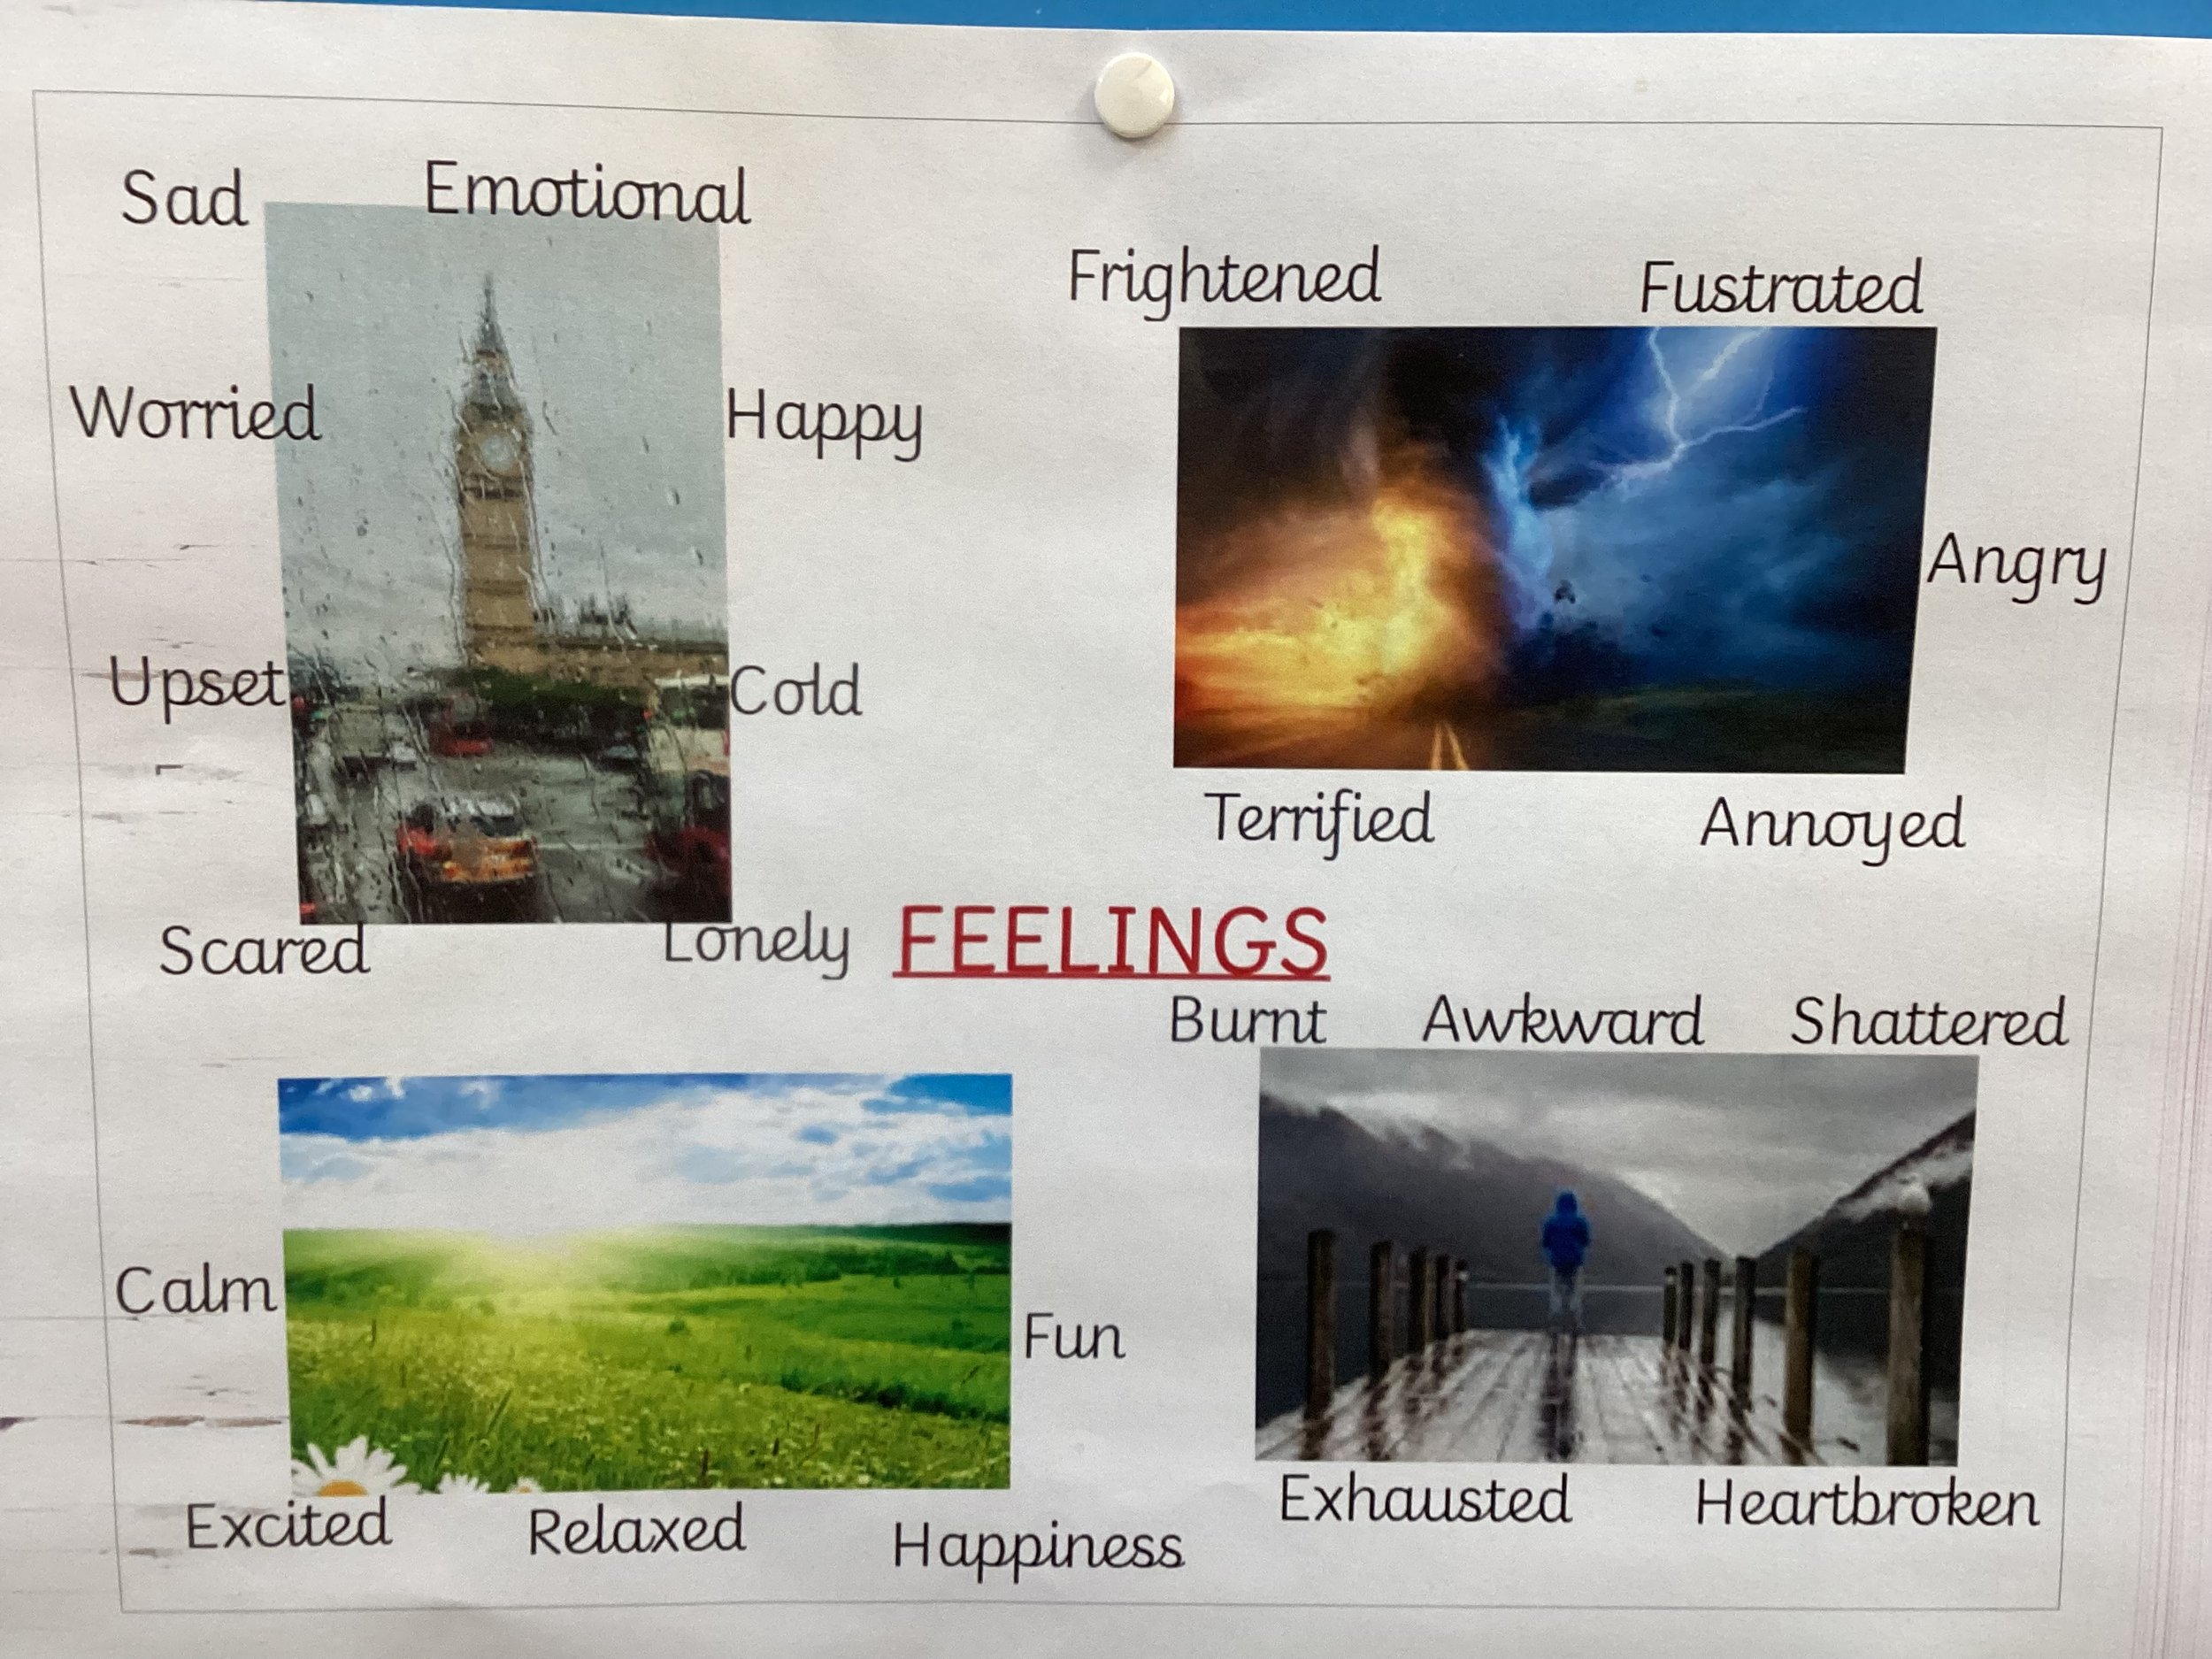 P4C - Emotions And Feelings!